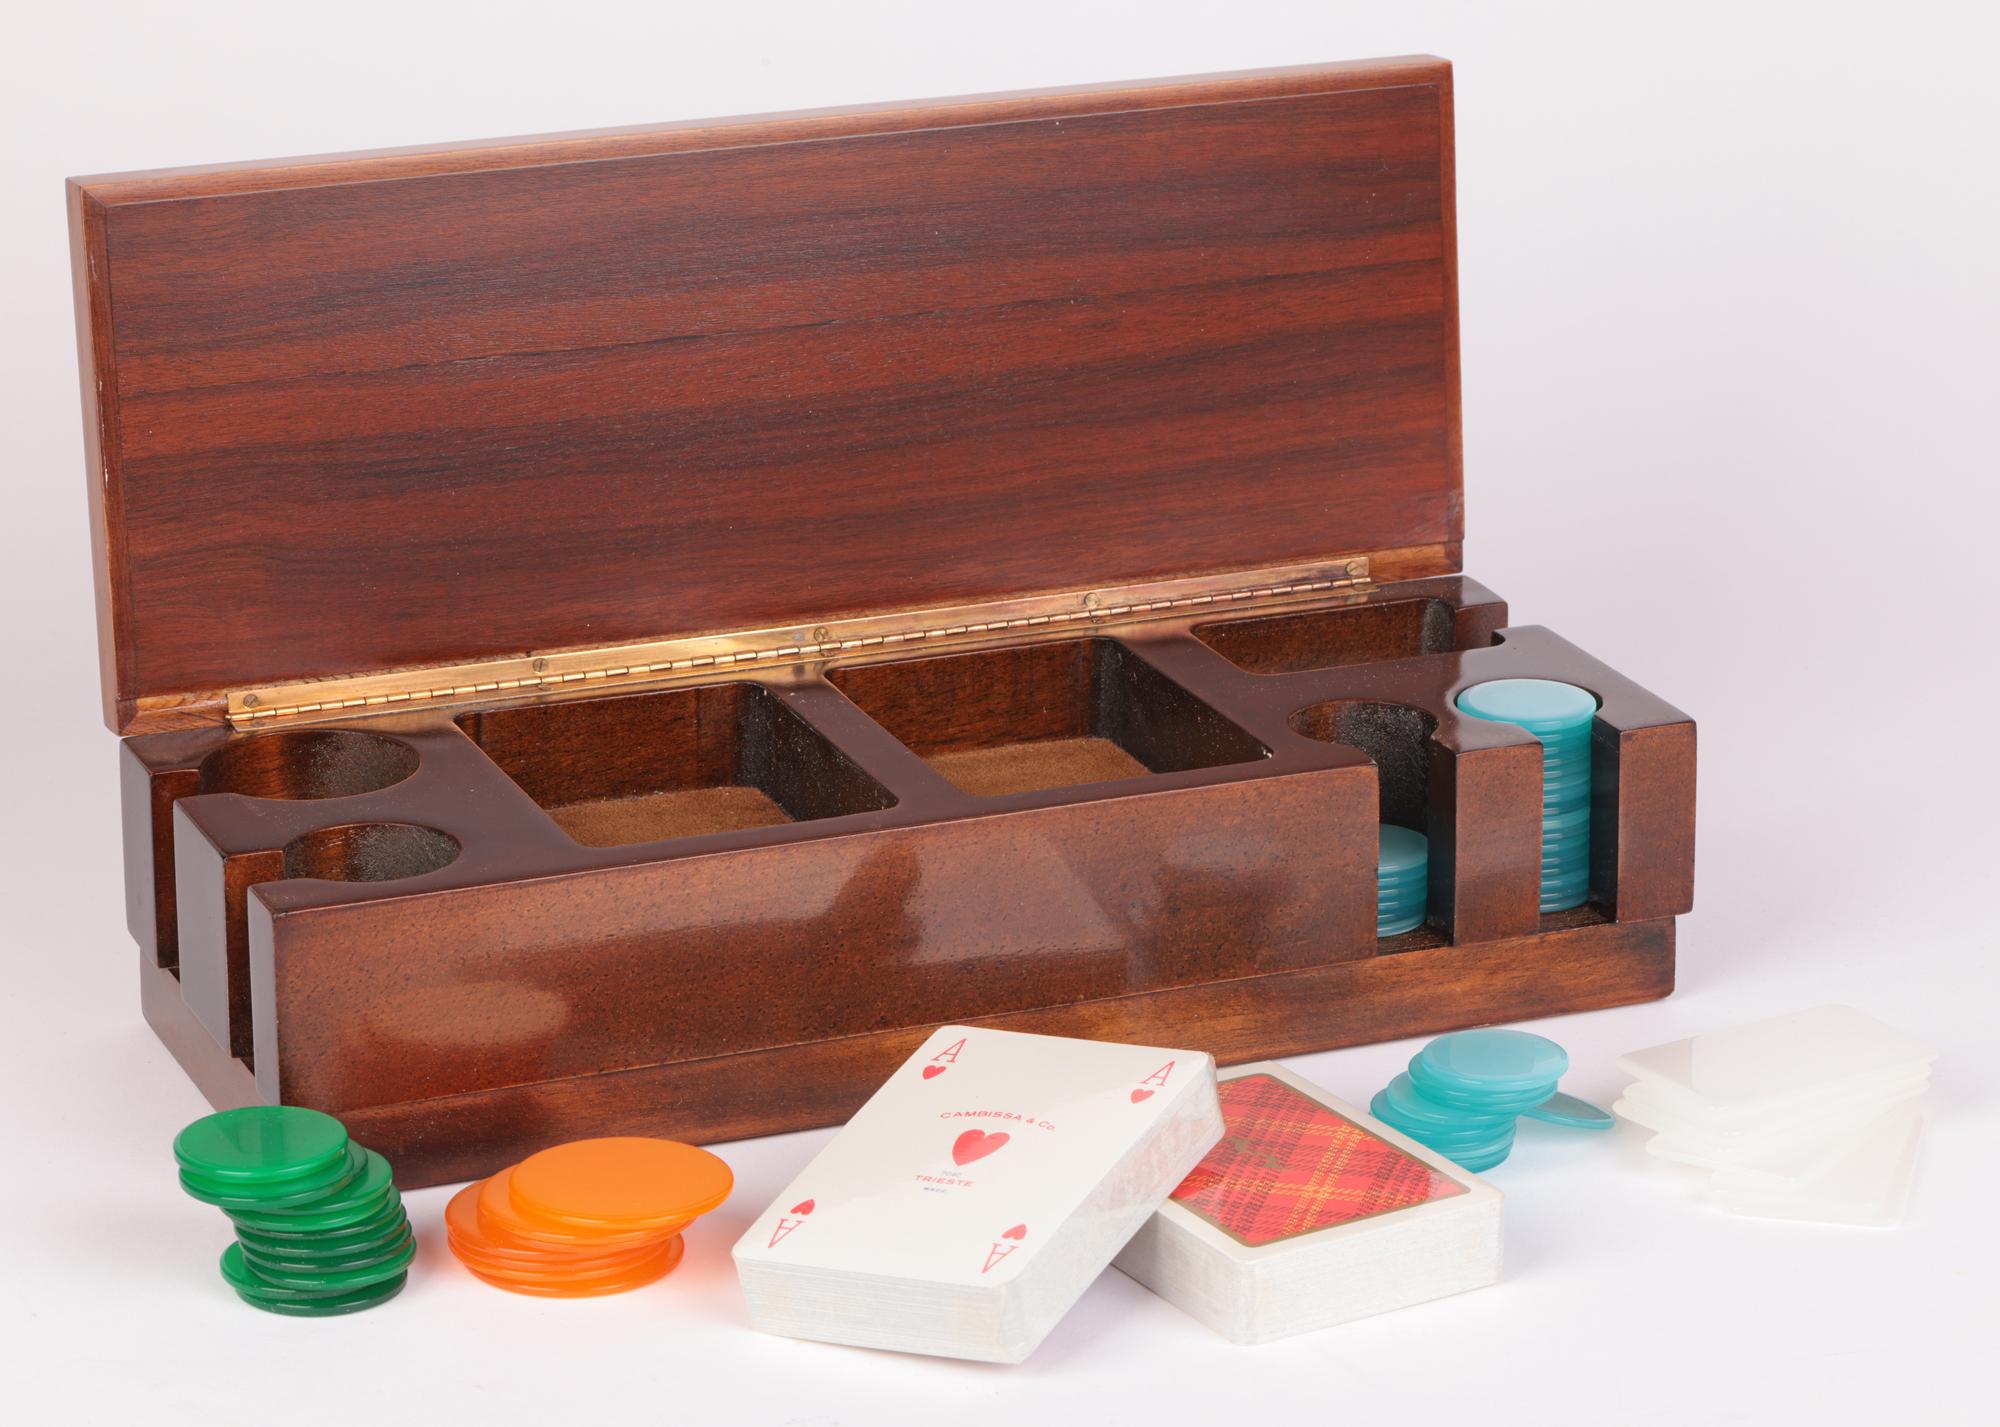 Cambissa & Co Italian Wood Cased Card & Counter Gaming Set In Good Condition For Sale In Bishop's Stortford, Hertfordshire